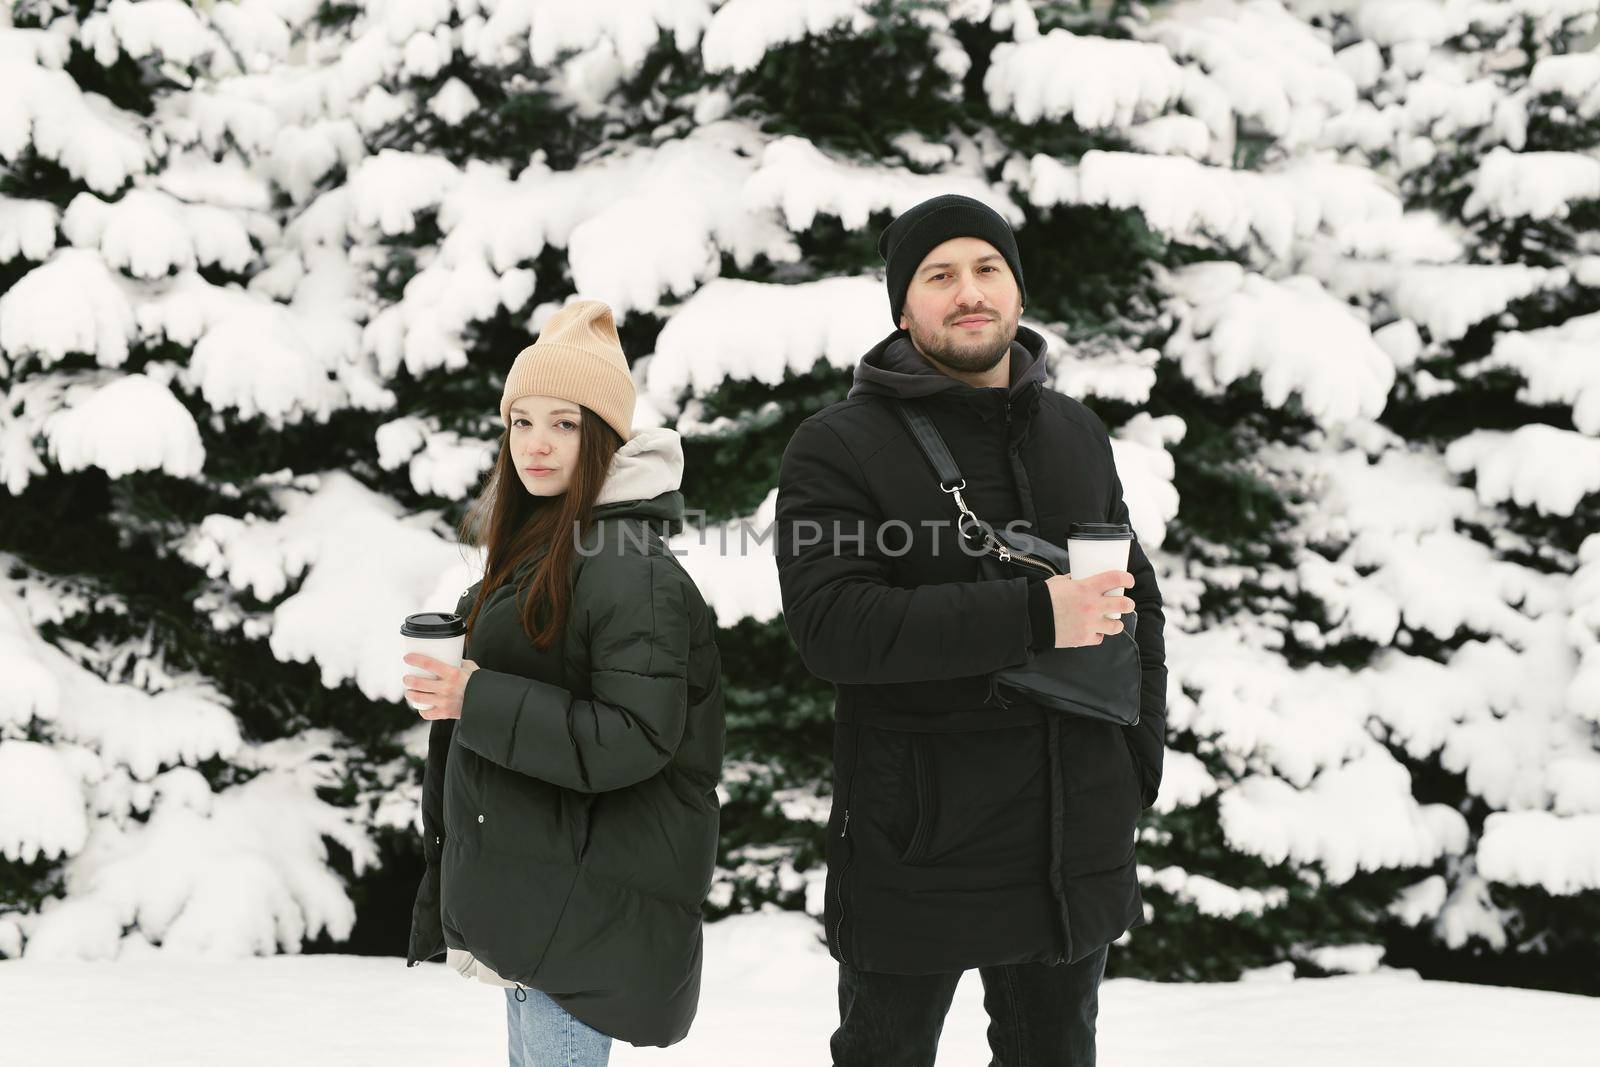 The man and the woman have a rest in the winter park. Young friends in winter style clothes standing among snowy trees and enjoying first snow.